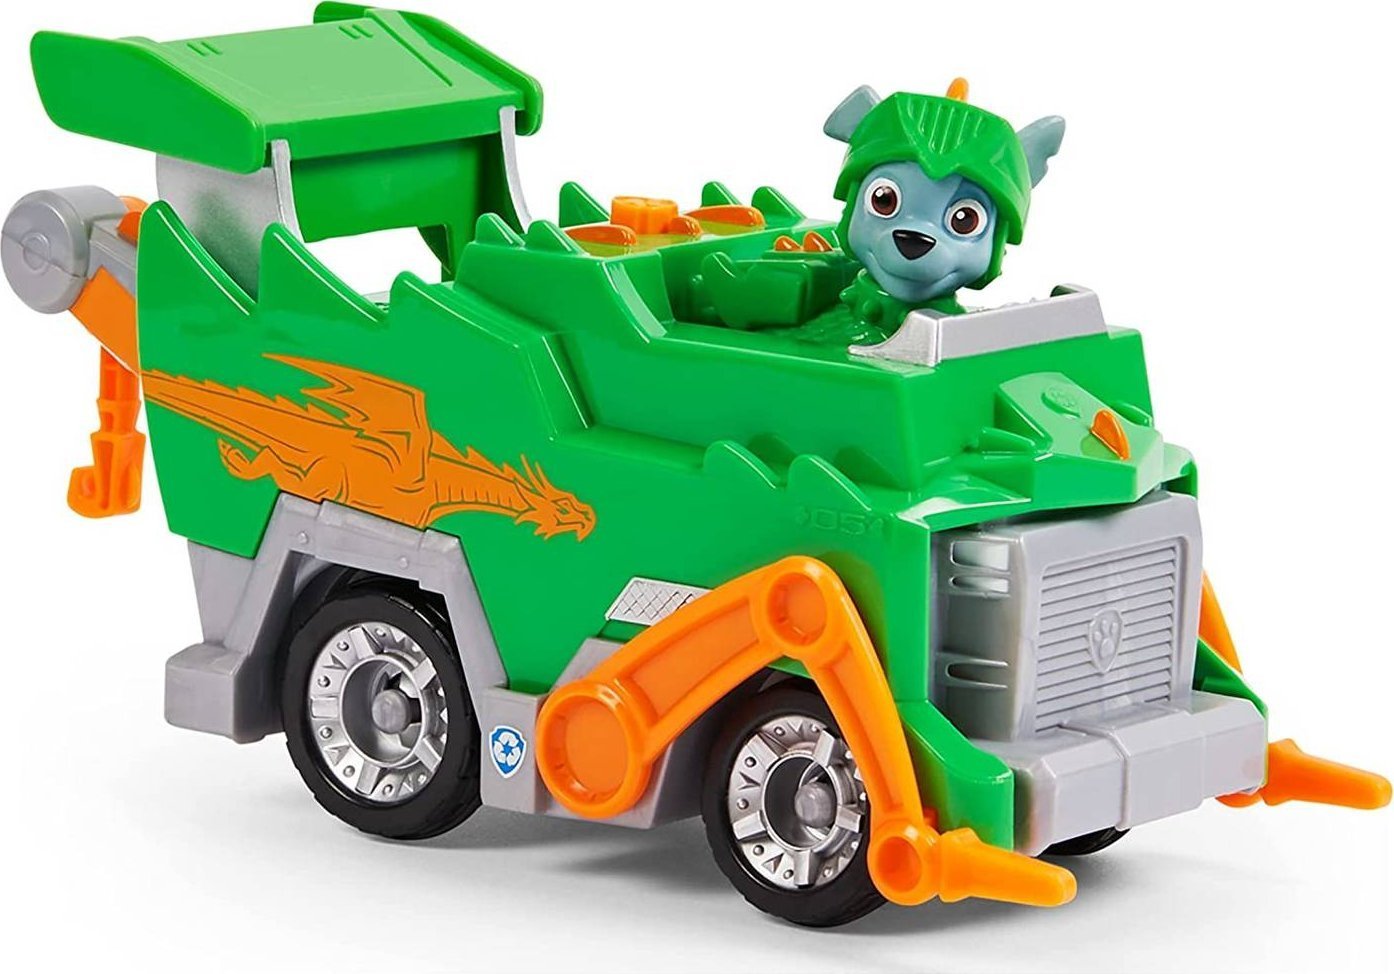 Promo Spin Master PAW PATROL Rescue Knights Paw Patrol Rocky Knights Auto vehicul 6063588 Spin Master